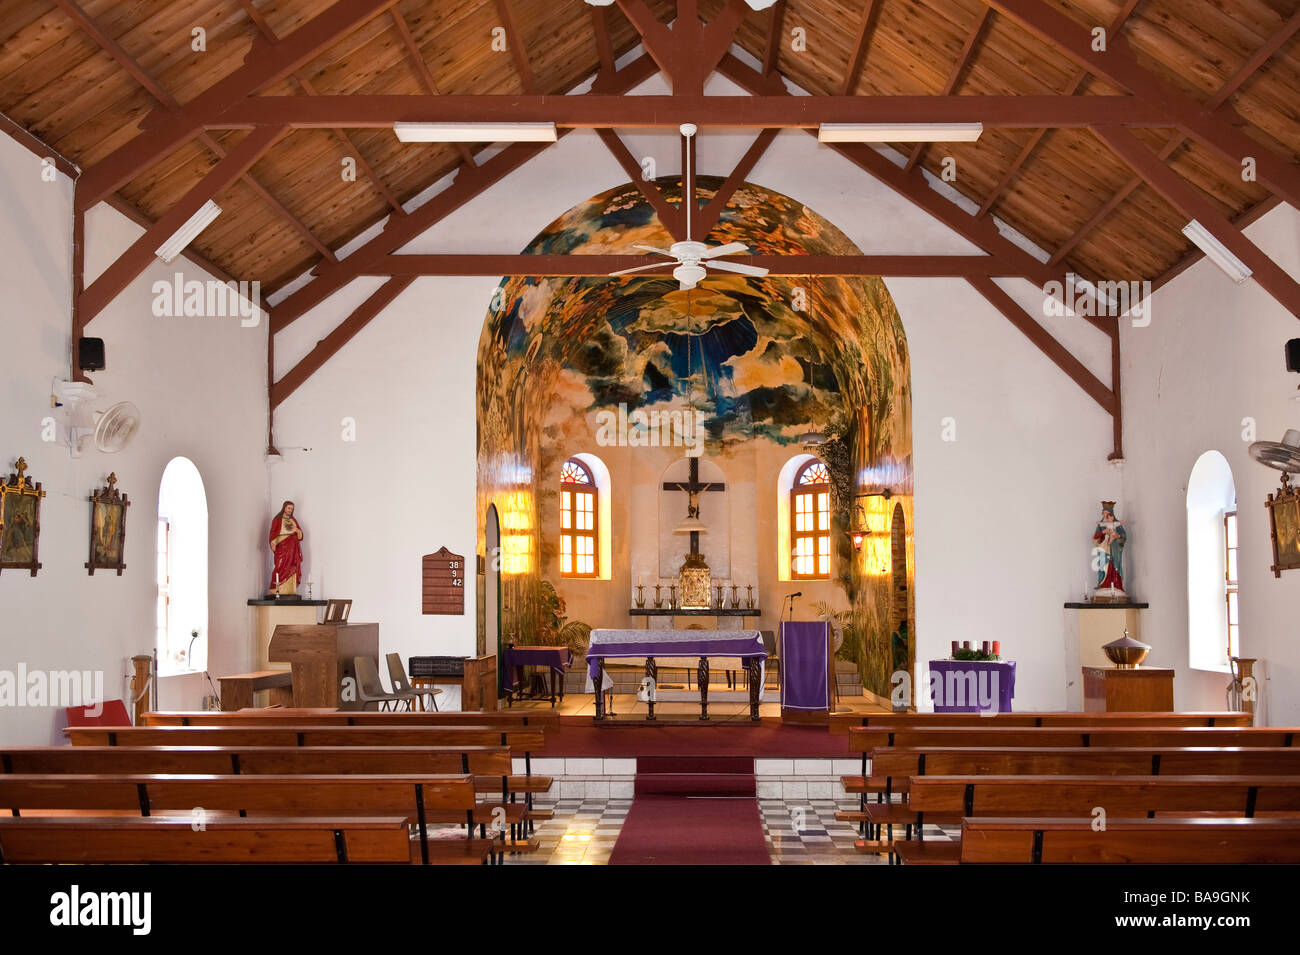 Interior view of Sacred Heart Roman Catholic Church in The Bottom, Saba with painted mural by Heleen Comet in the apse Stock Photo